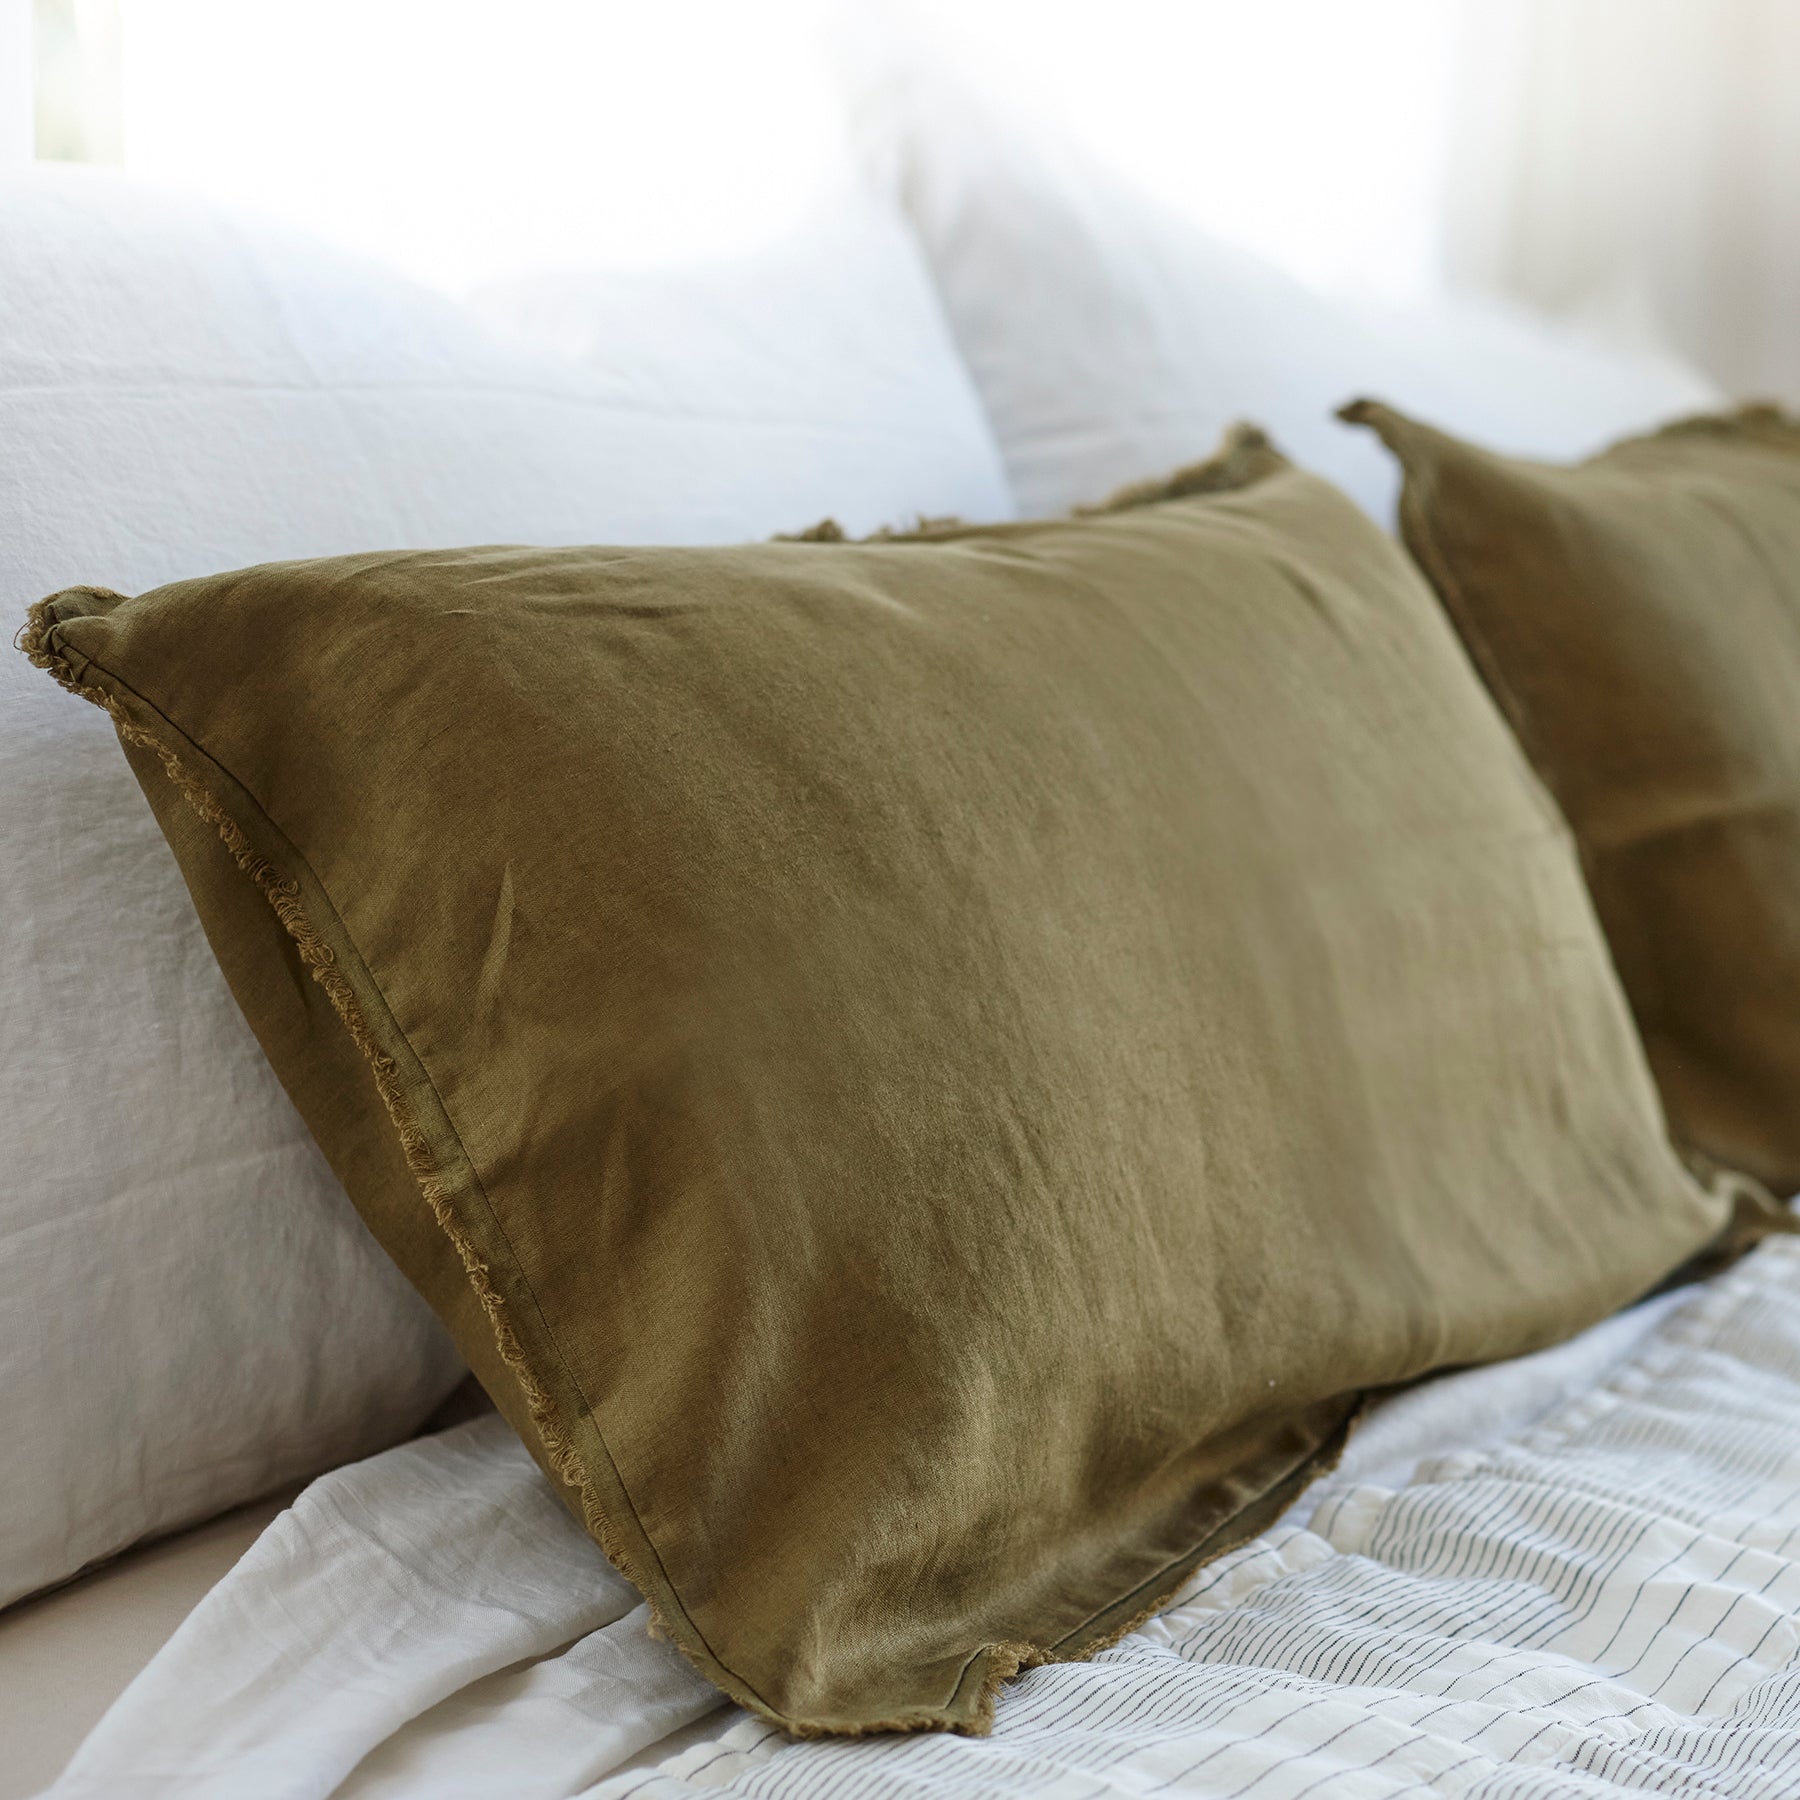 Pair of Linen Pillowcases in Olive